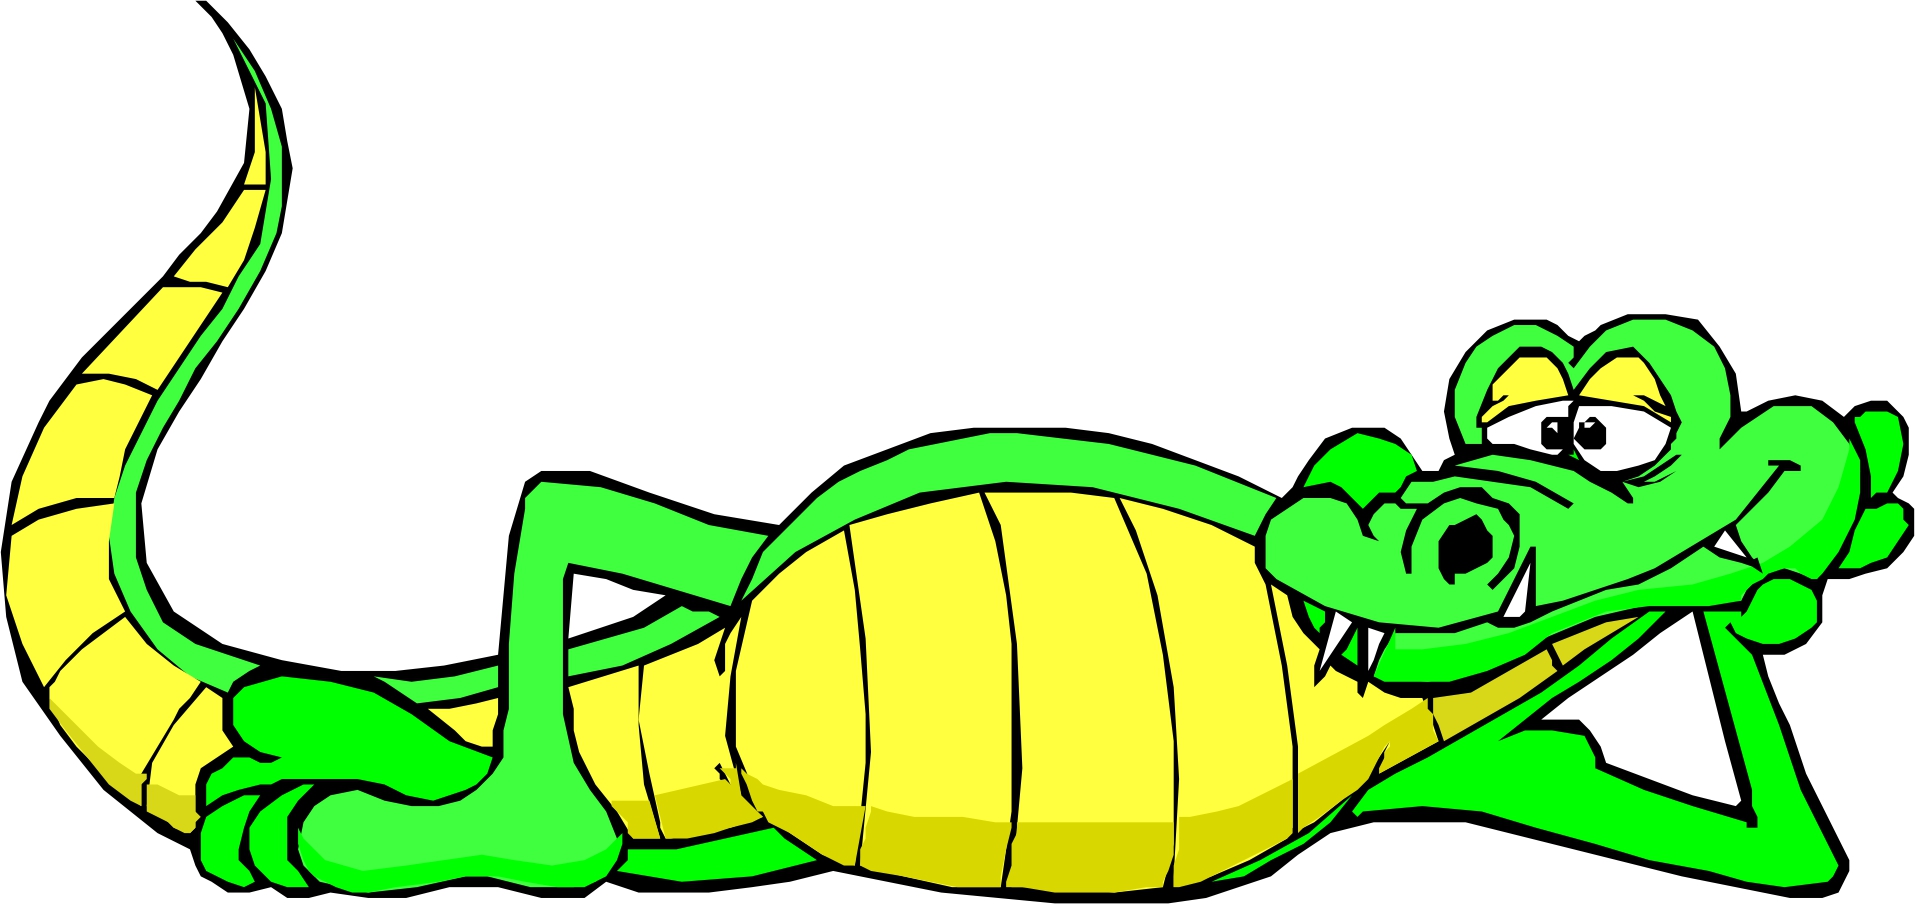 Alligator with mouth open clipart free clip art images image #12314.